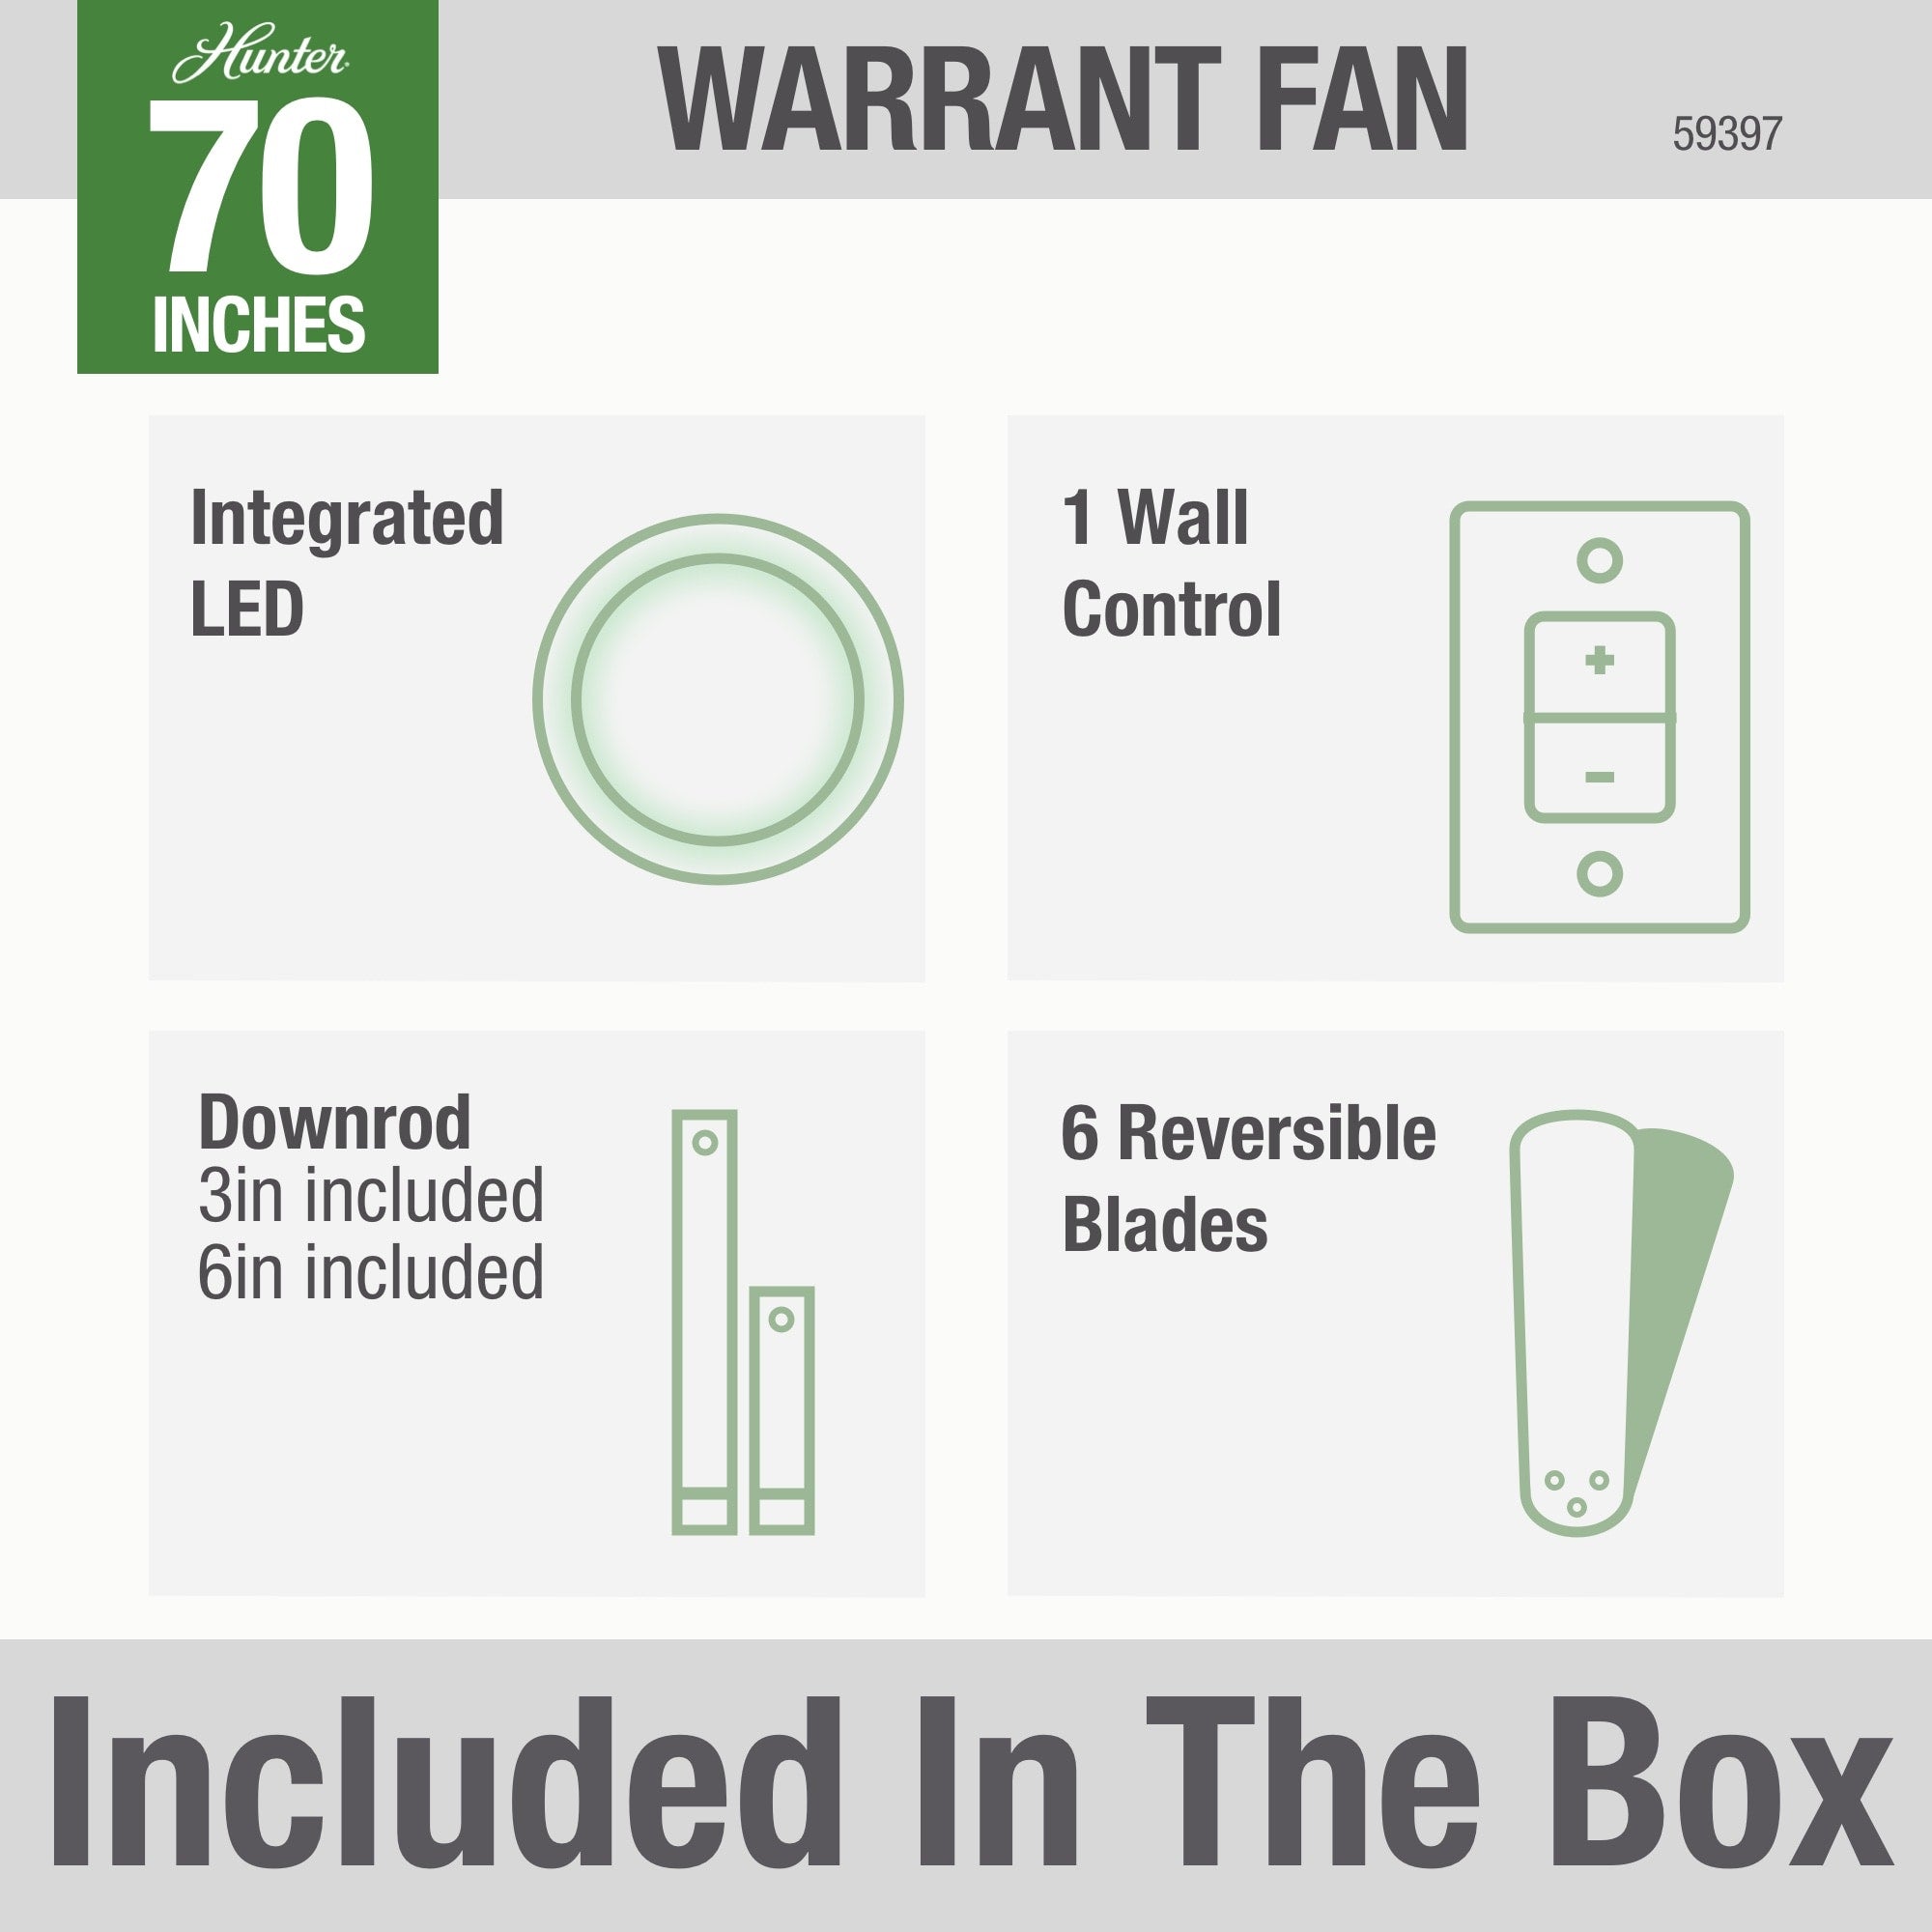 Hunter 70 inch Warrant Ceiling Fan with LED Light Kit and Wall Control Ceiling Fan Hunter   